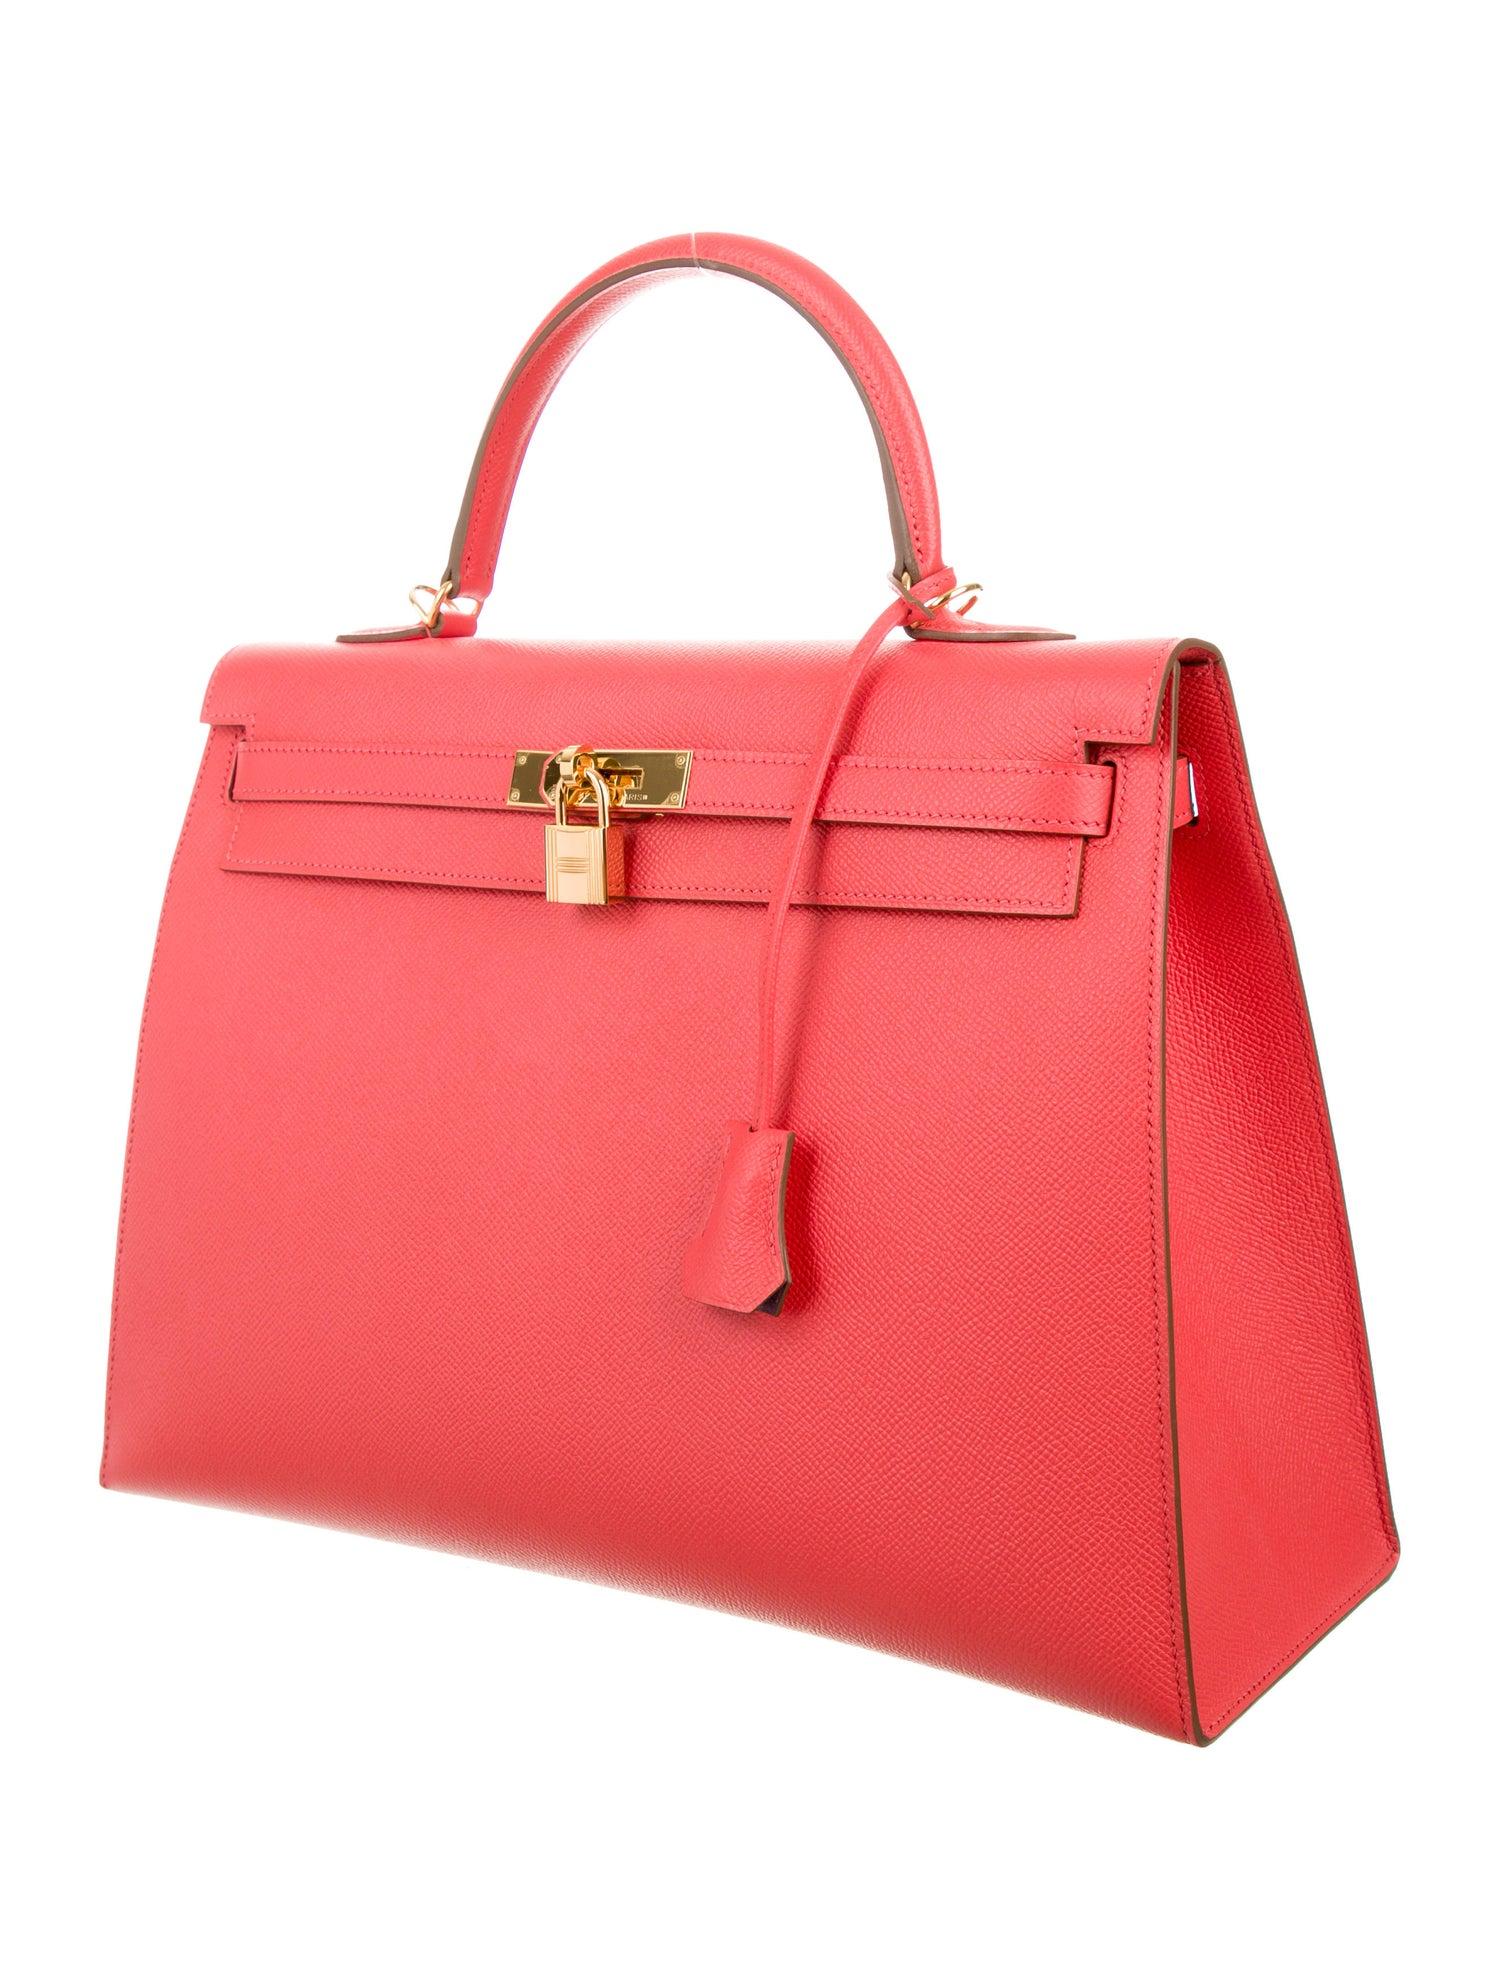 Own a Special Order Hermes Kelly Without Waiting.

The process to secure a special order Hermes Kelly bag in any color or leather is long. The opportunity to own one in the most popular and rare color, Rose Jaipur, is even more daunting.  Now is